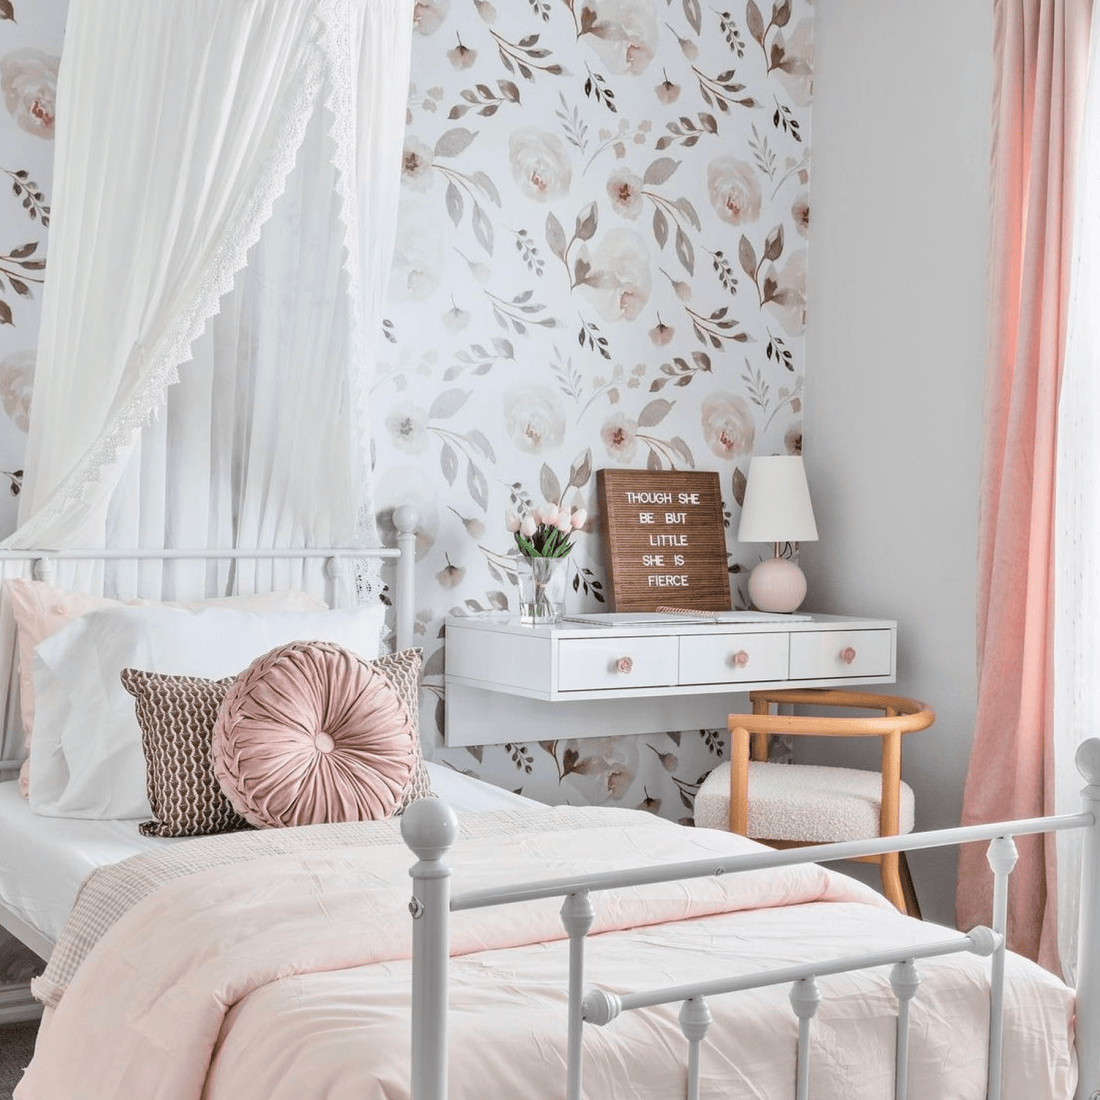 Enchanting Room Reveal: A Young Girl\'s Whimsical Bedroom ...